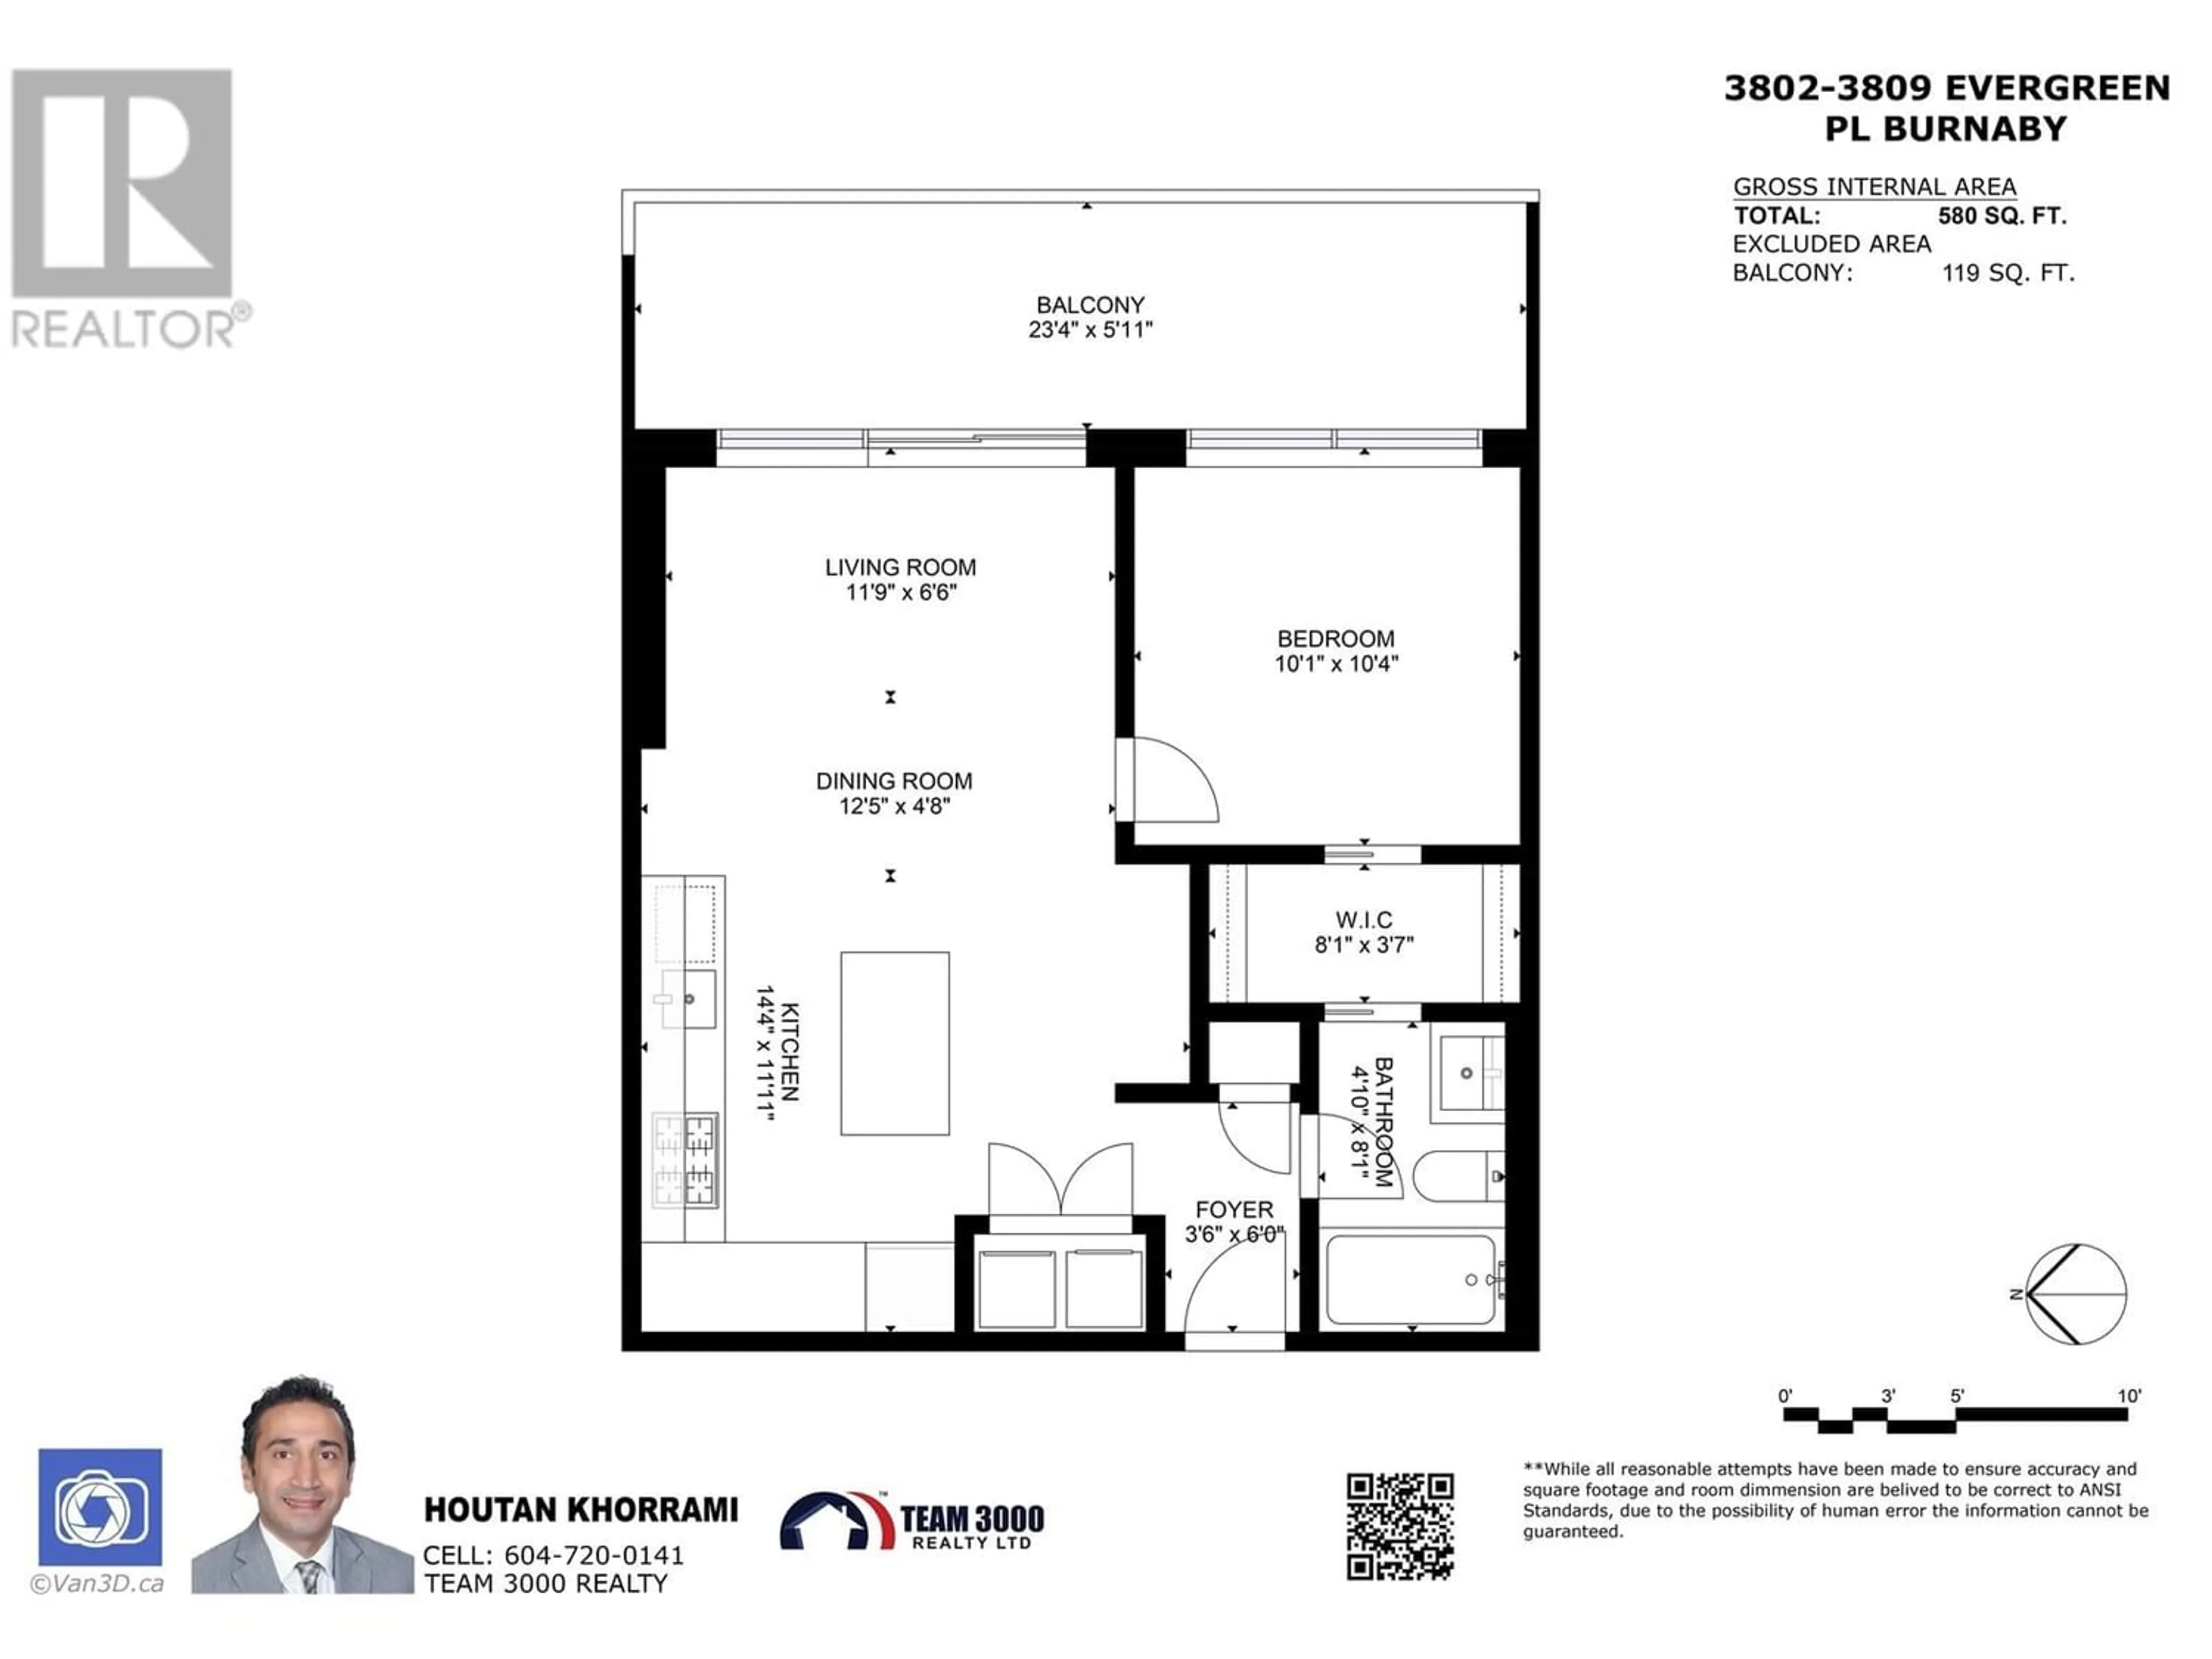 Floor plan for 3802 3809 EVERGREEN PLACE, Burnaby British Columbia V3J0M1